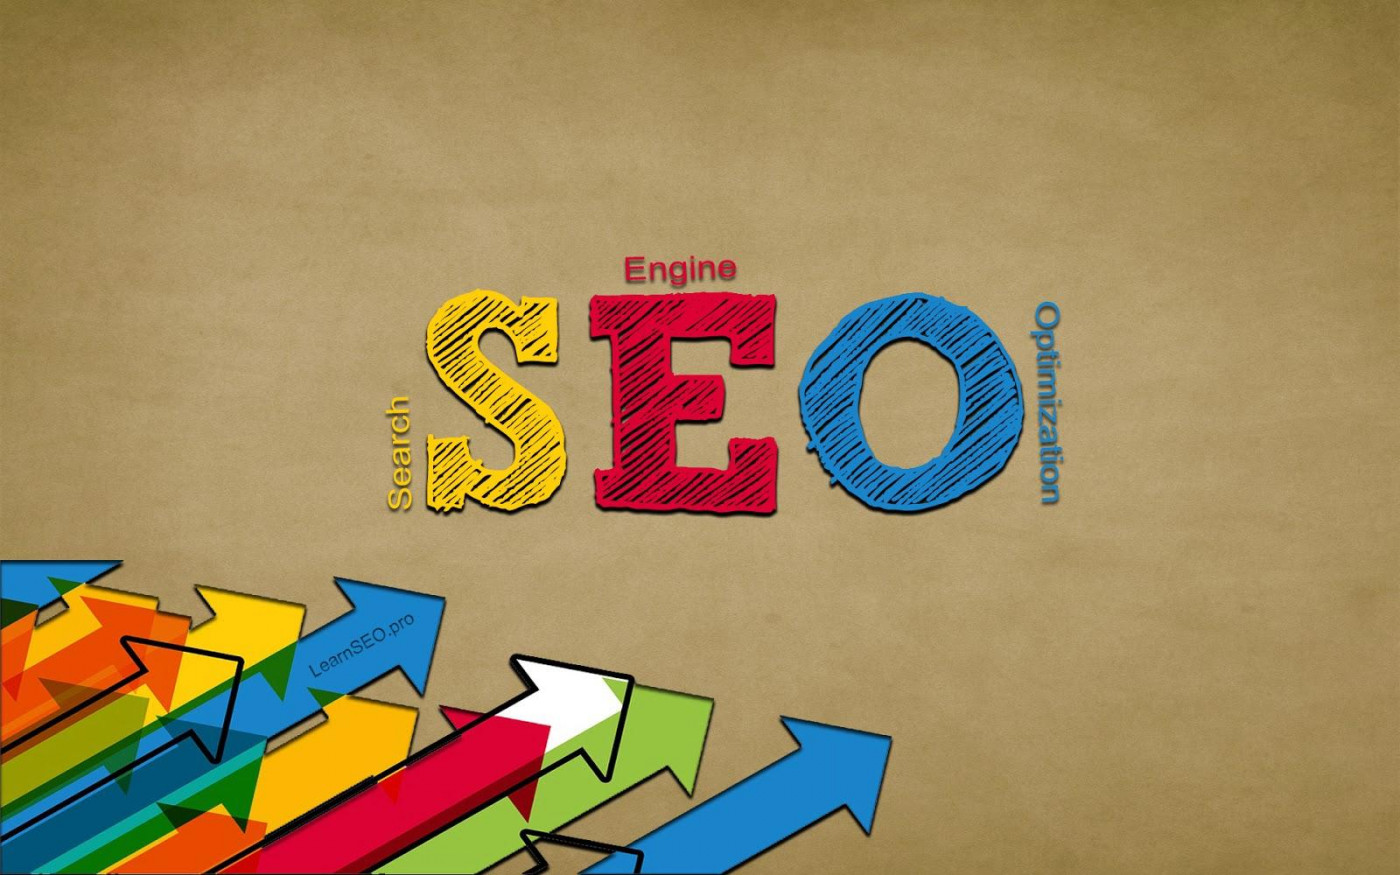 Organic Search Engine Optimization Explained in Detail, Top Tips 4 U